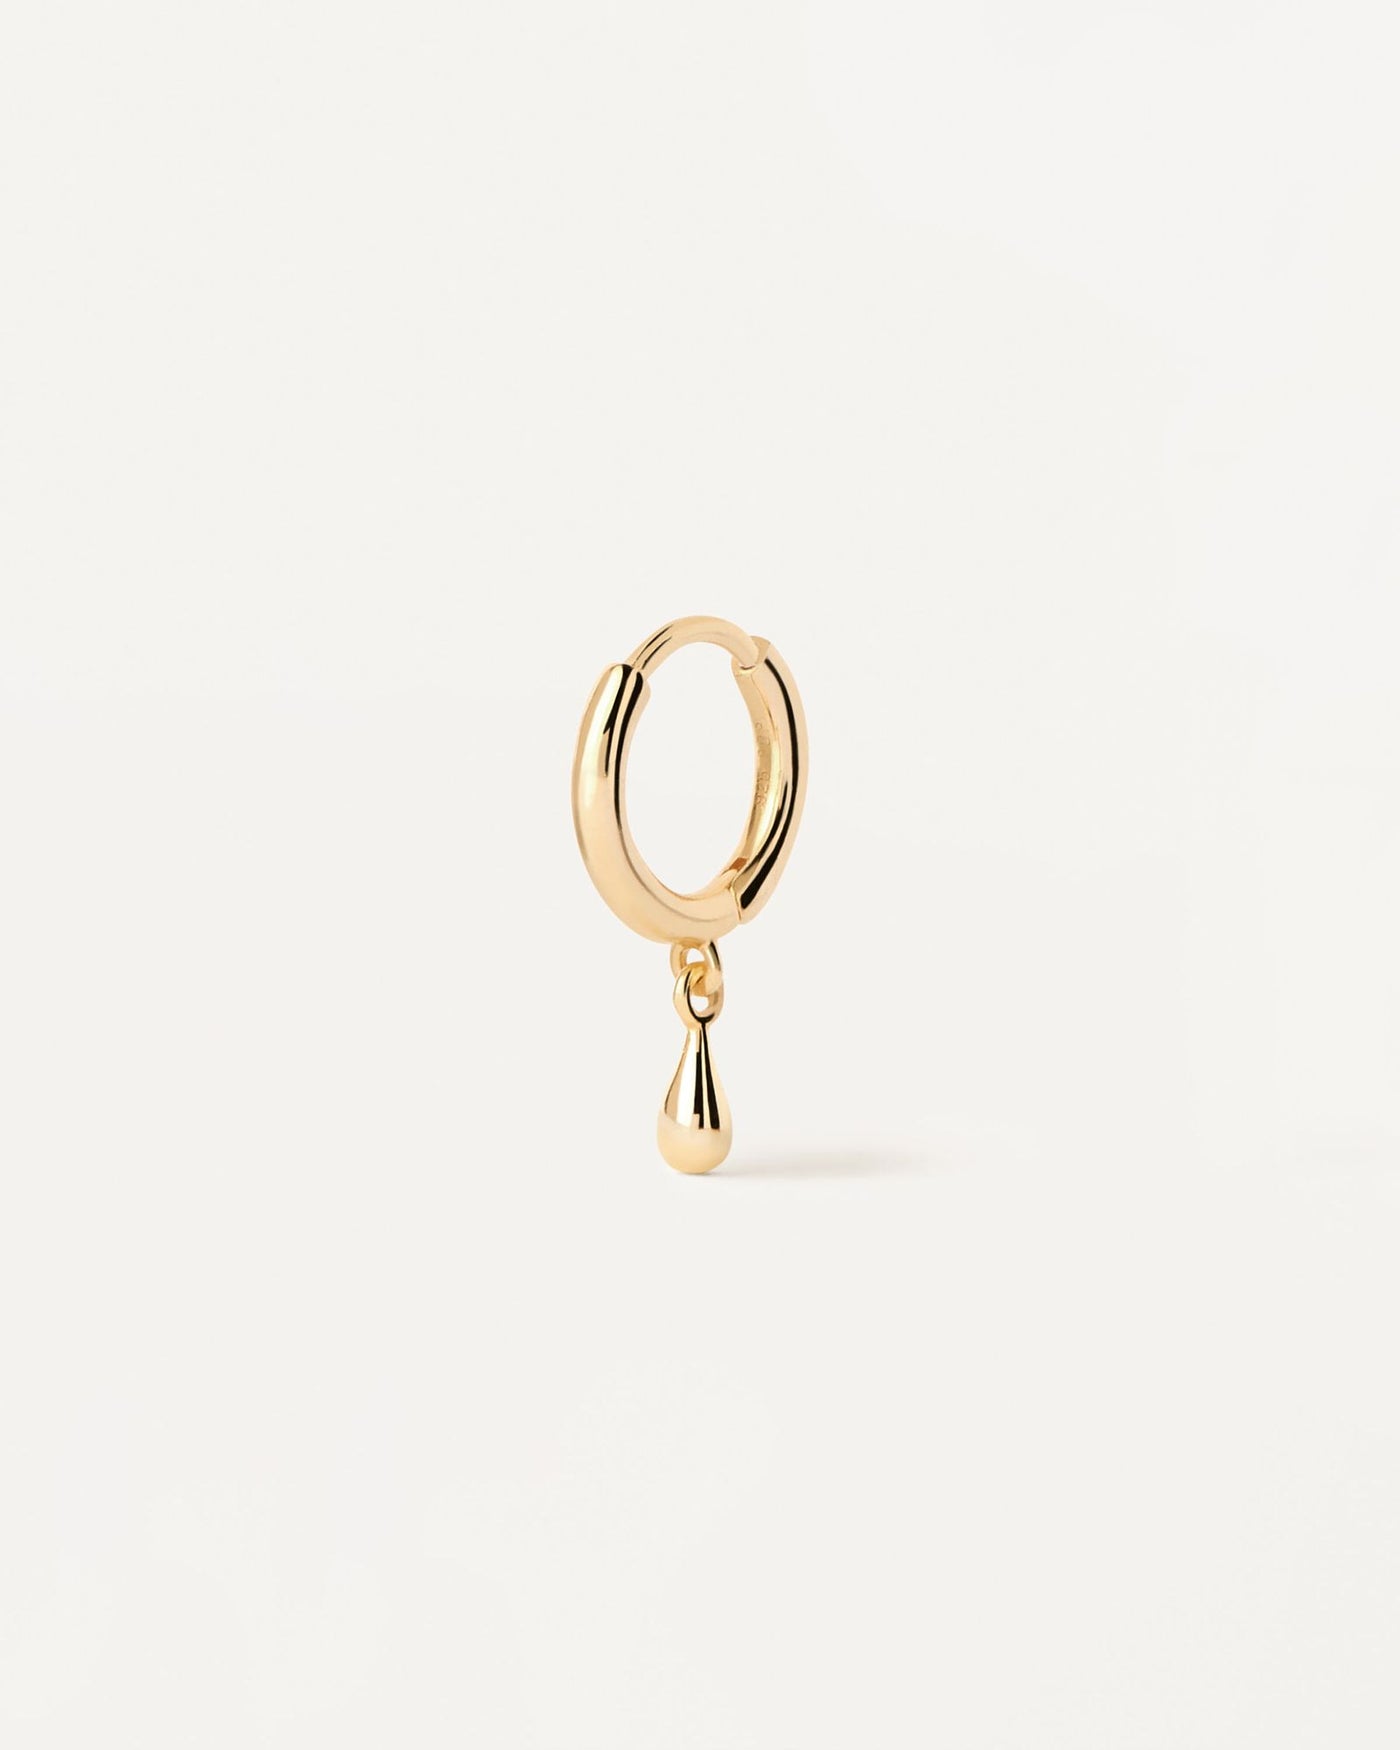 2024 Selection | Teardrop Single Hoop Earring. Gold-plated silver ear piercing with small drop pendant. Get the latest arrival from PDPAOLA. Place your order safely and get this Best Seller. Free Shipping.